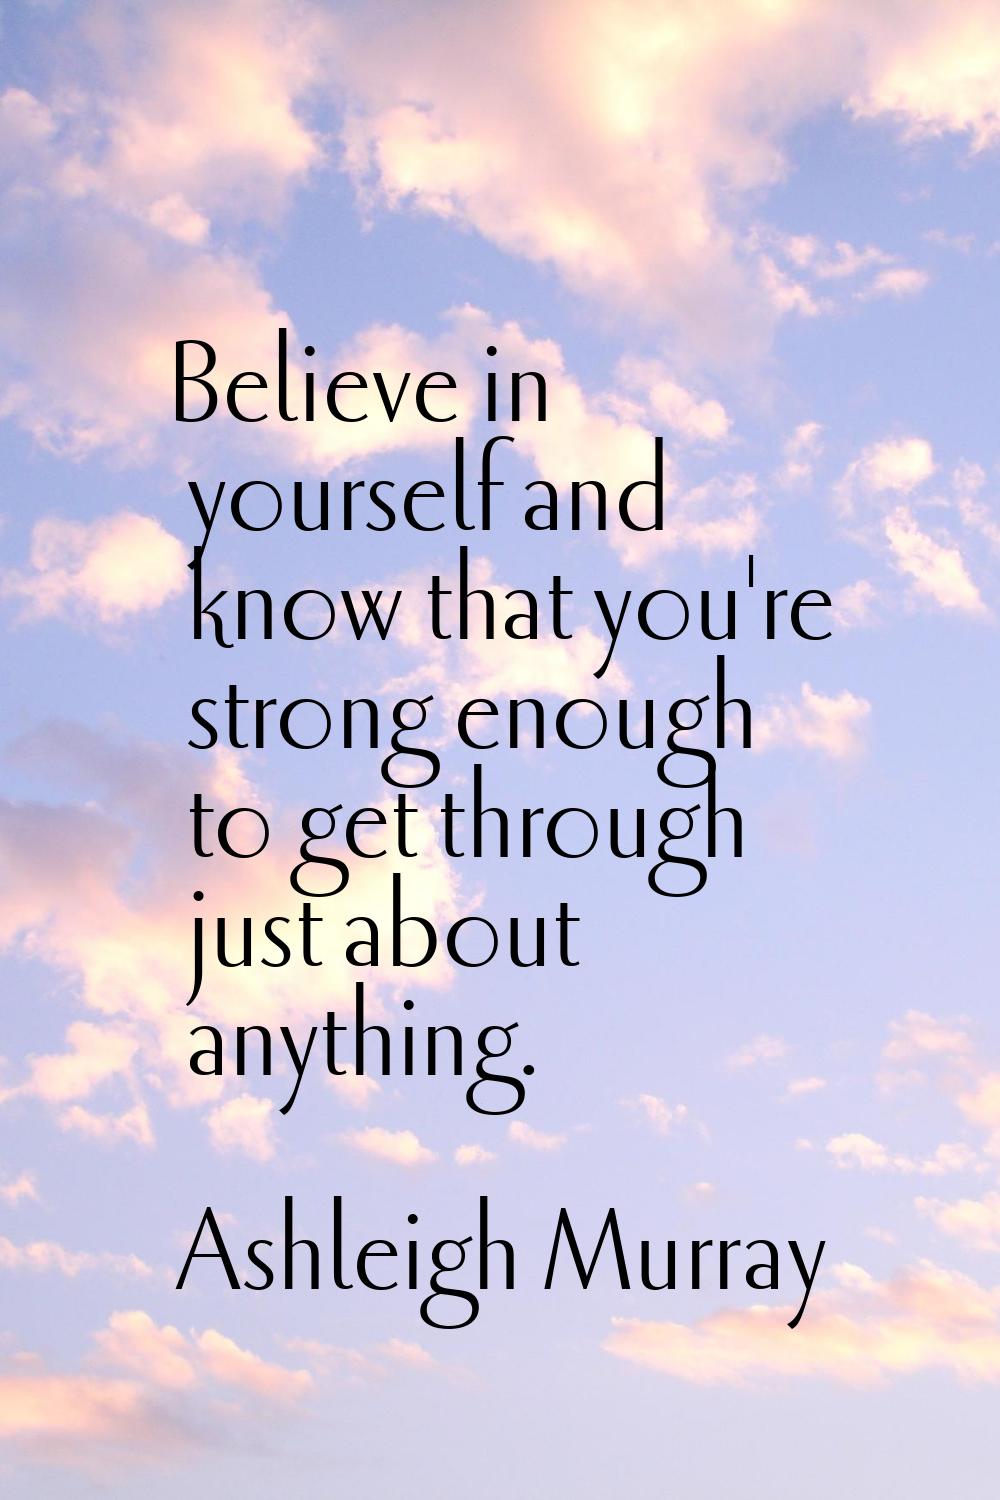 Believe in yourself and know that you're strong enough to get through just about anything.